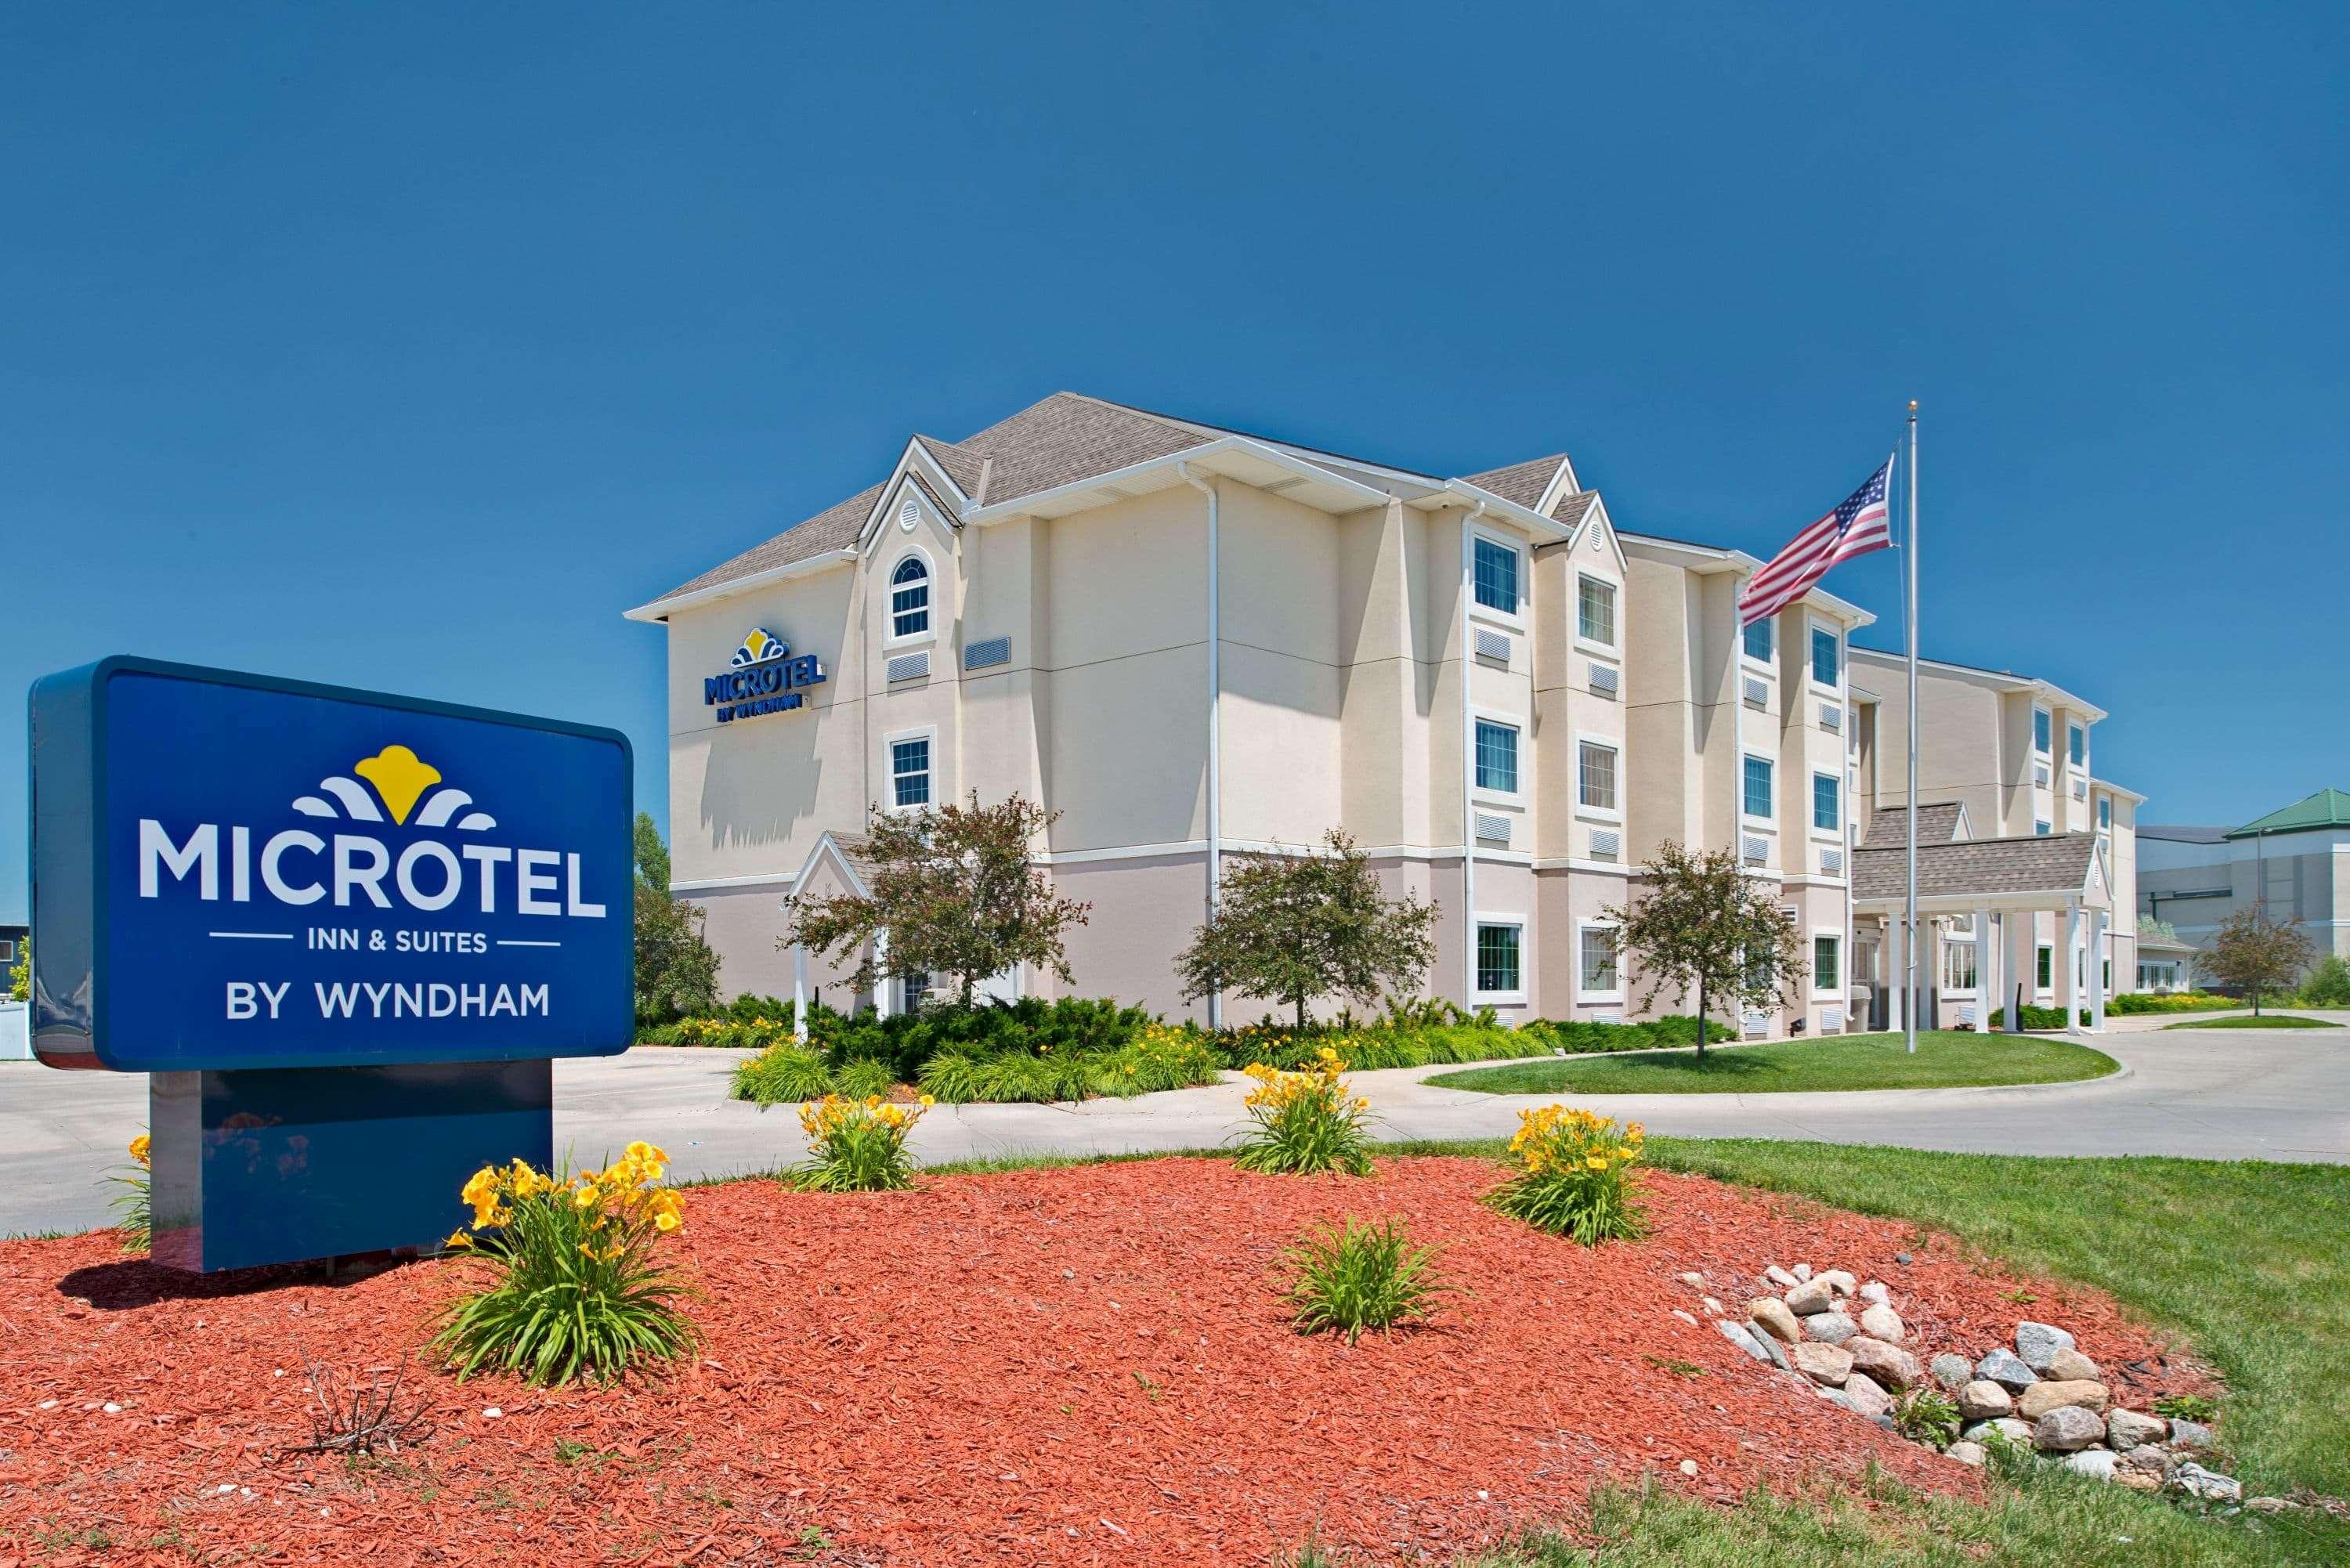 Microtel Inn & Suites by Wyndham Council Bluffs/Omaha image